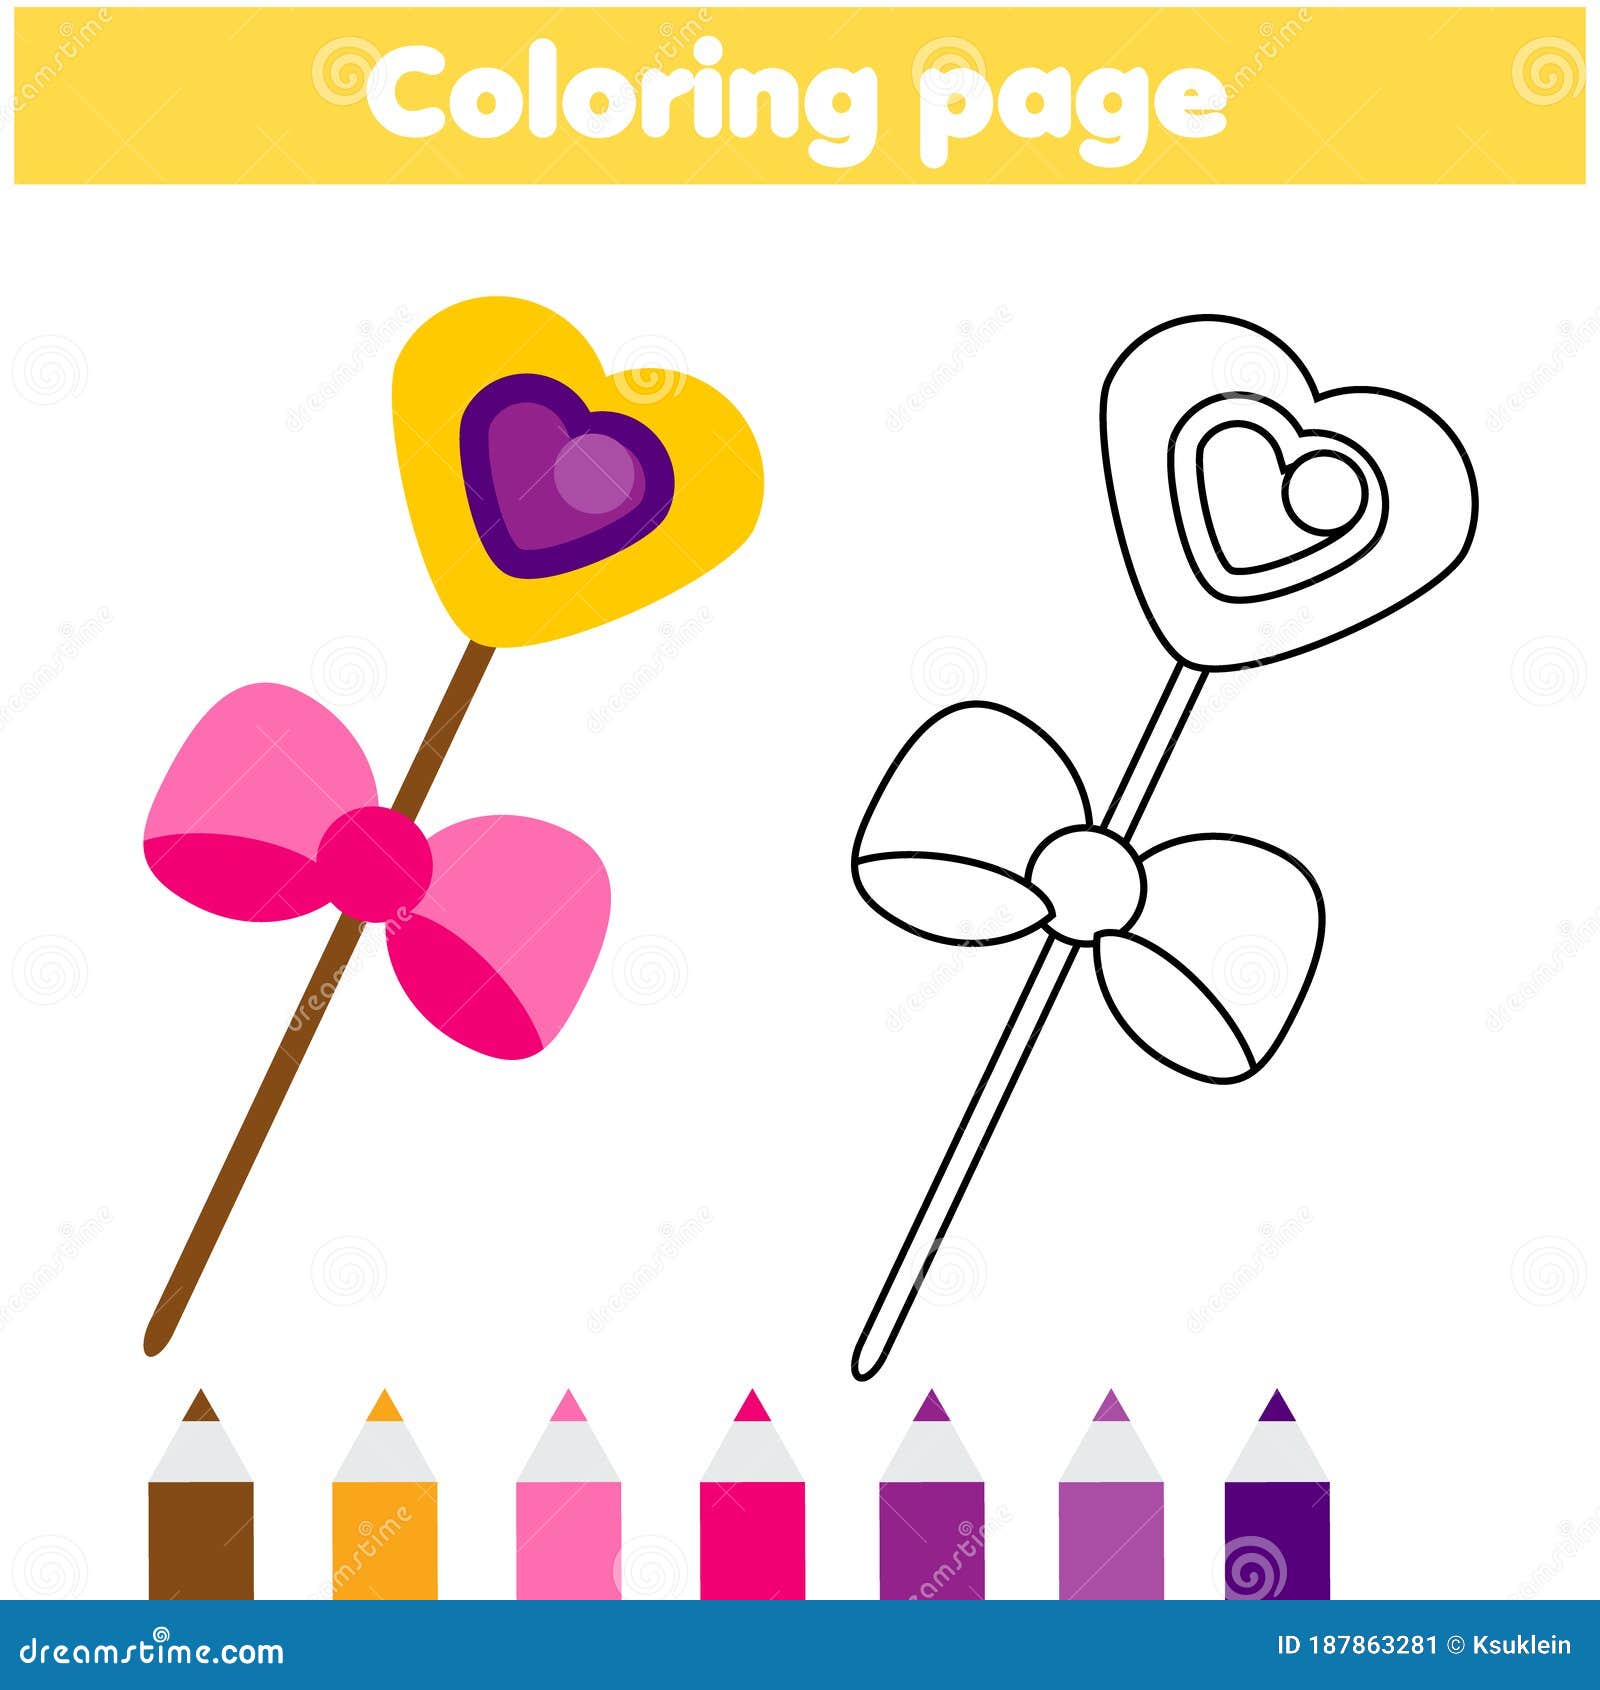 Coloring page with magic wand drawing kids activity stock vector